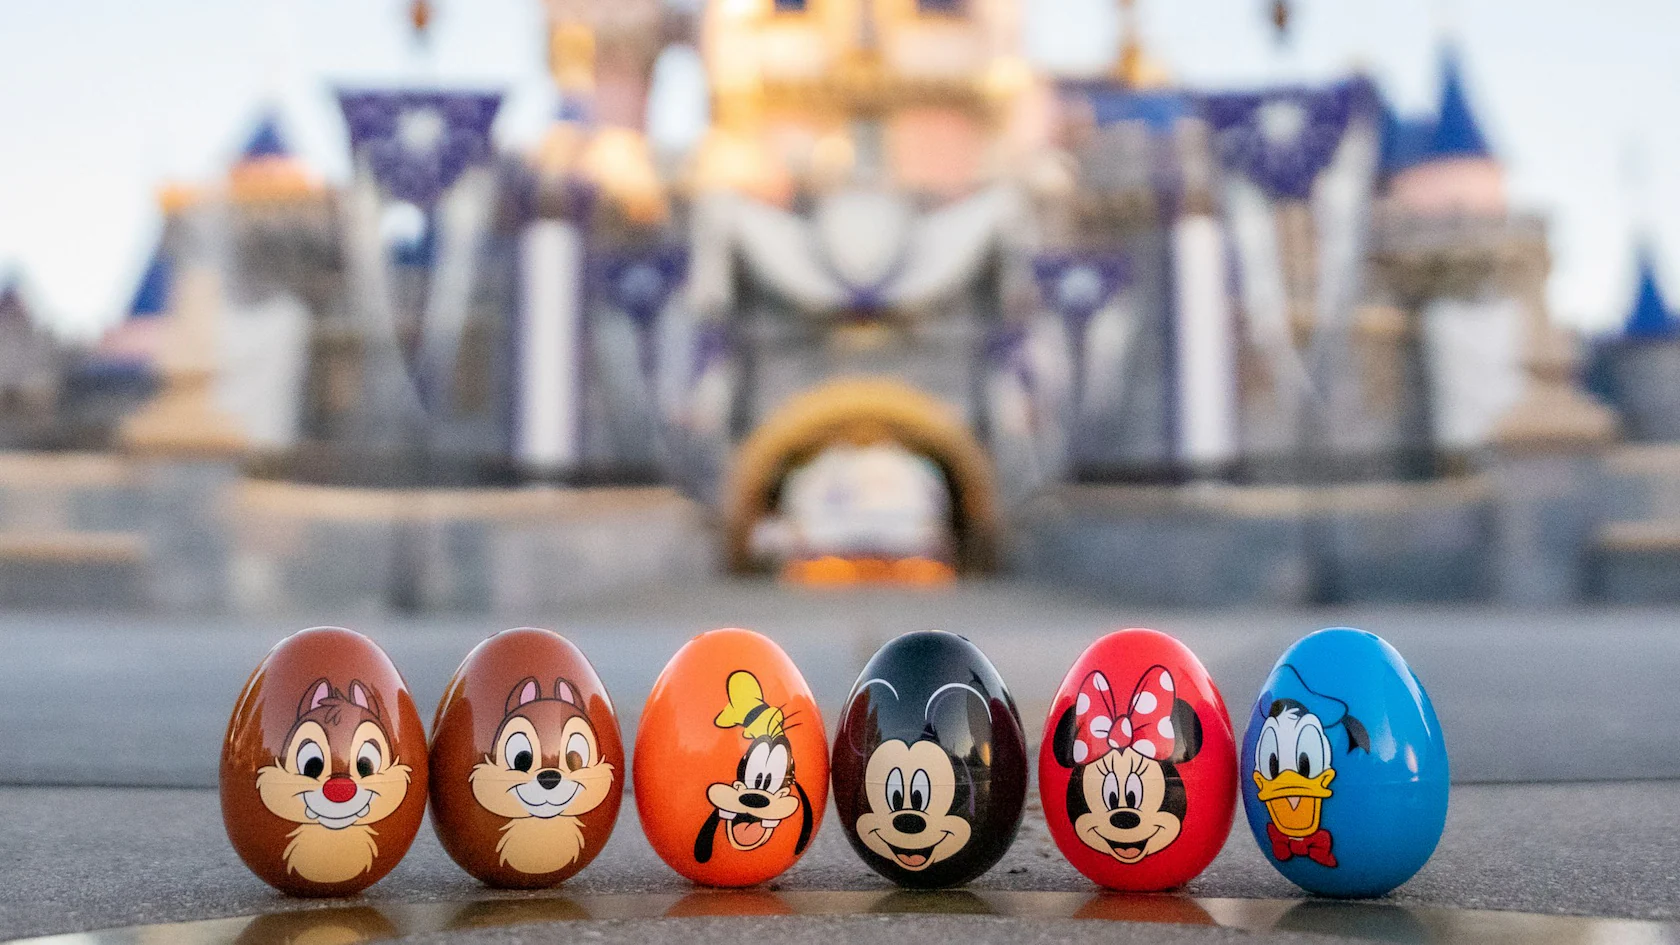 Disneyland is Hosting An Easter Egg Hunt. Here’s How You Can Join.